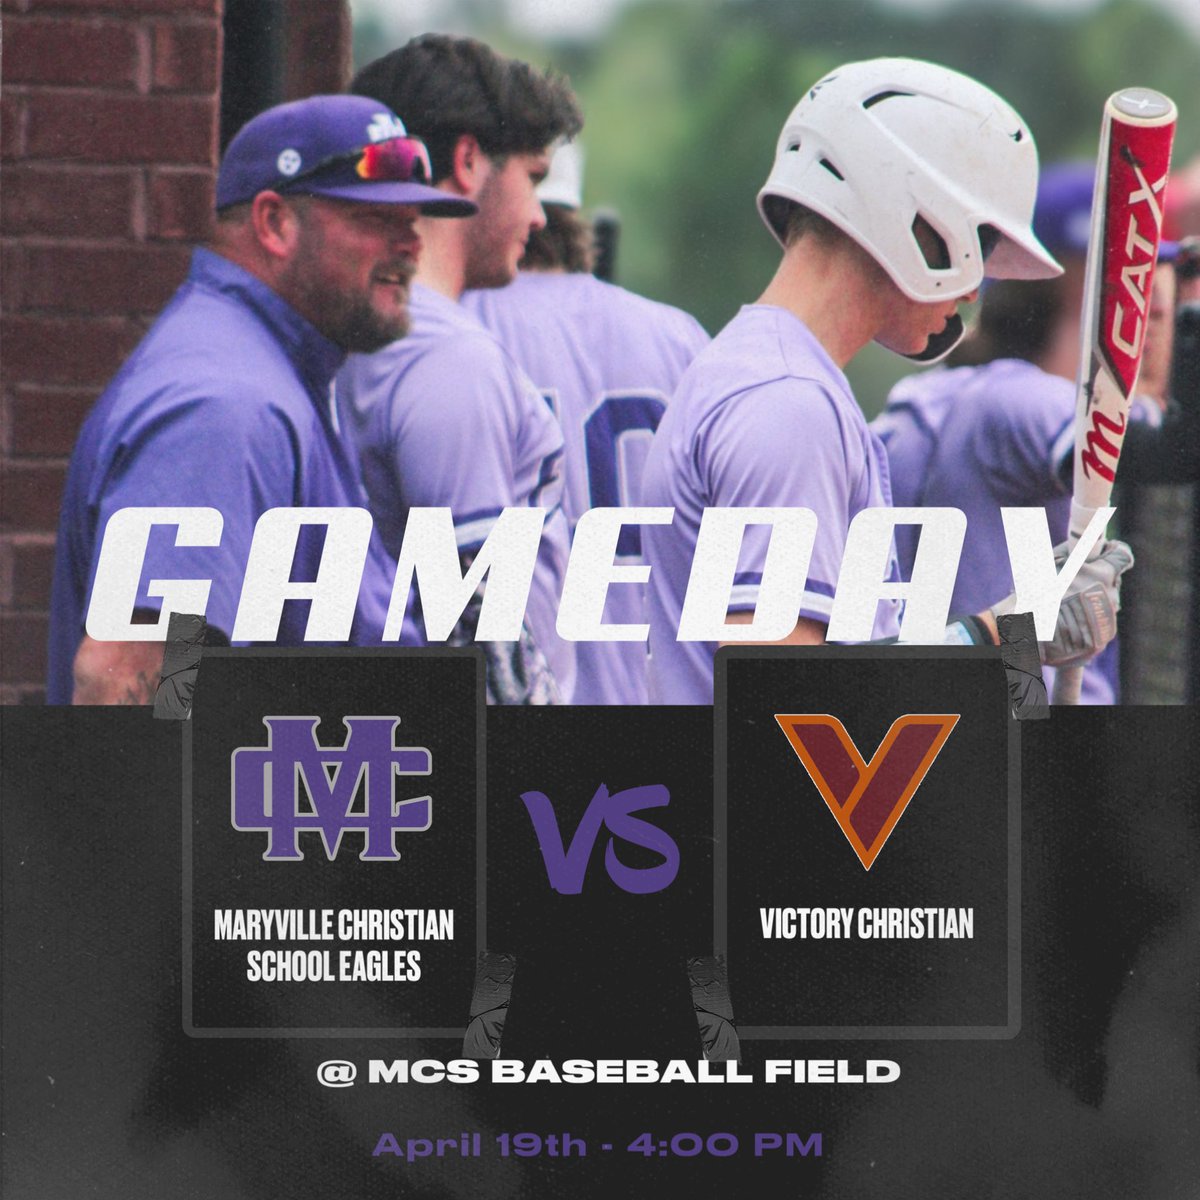 It’s GAMEDAY!! 

📍MCS Baseball Field
🆚Victory Christian
⏰4:00 PM

#GoEagles 

@TDT_Sports @ETBCAbsb